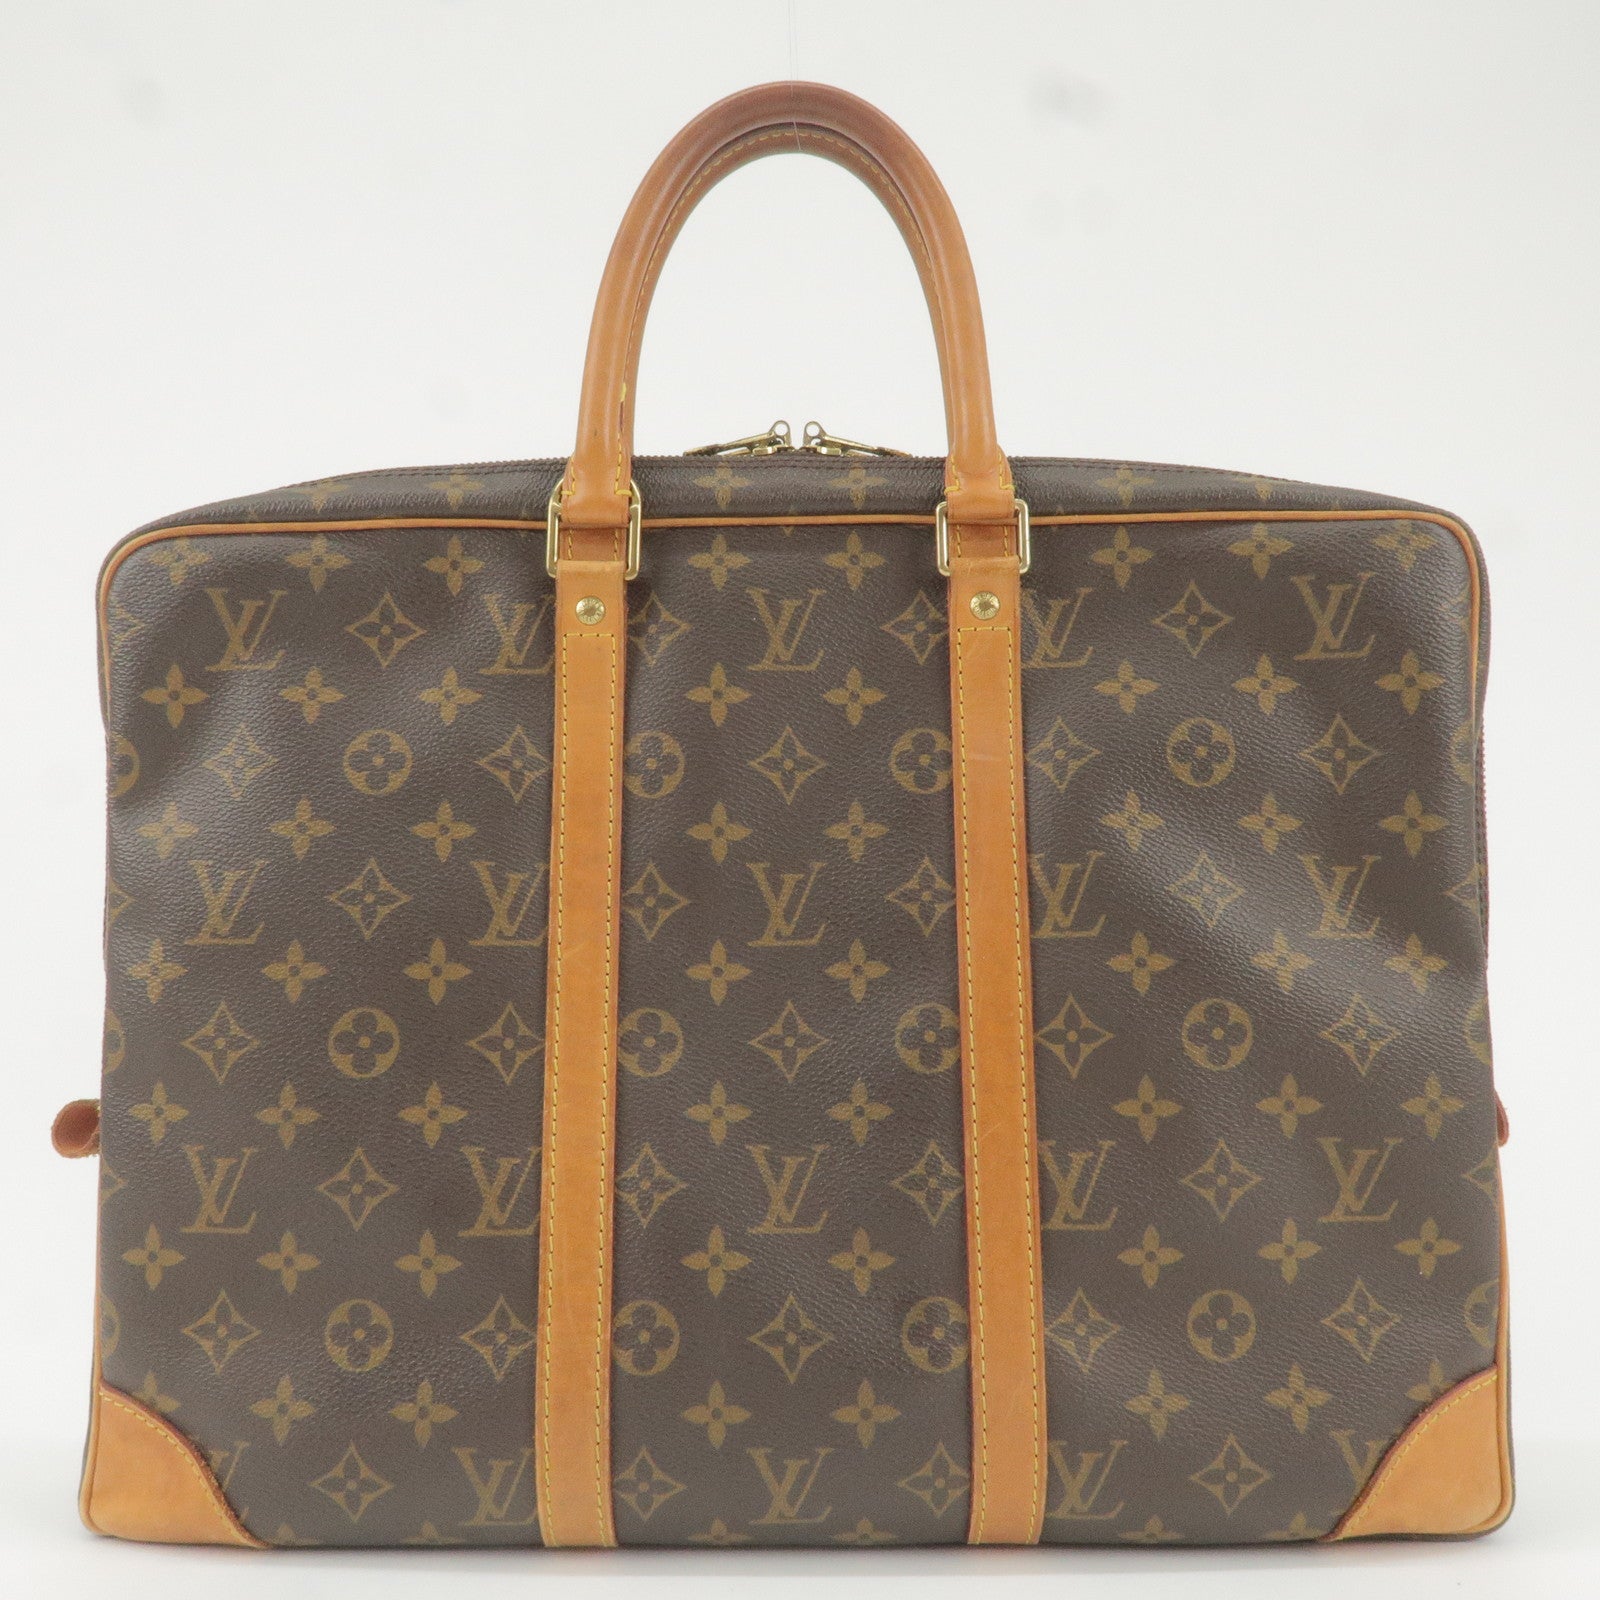 Louis Vuitton X Supreme Keepall 45 Red Duffle Bag for Sale in San